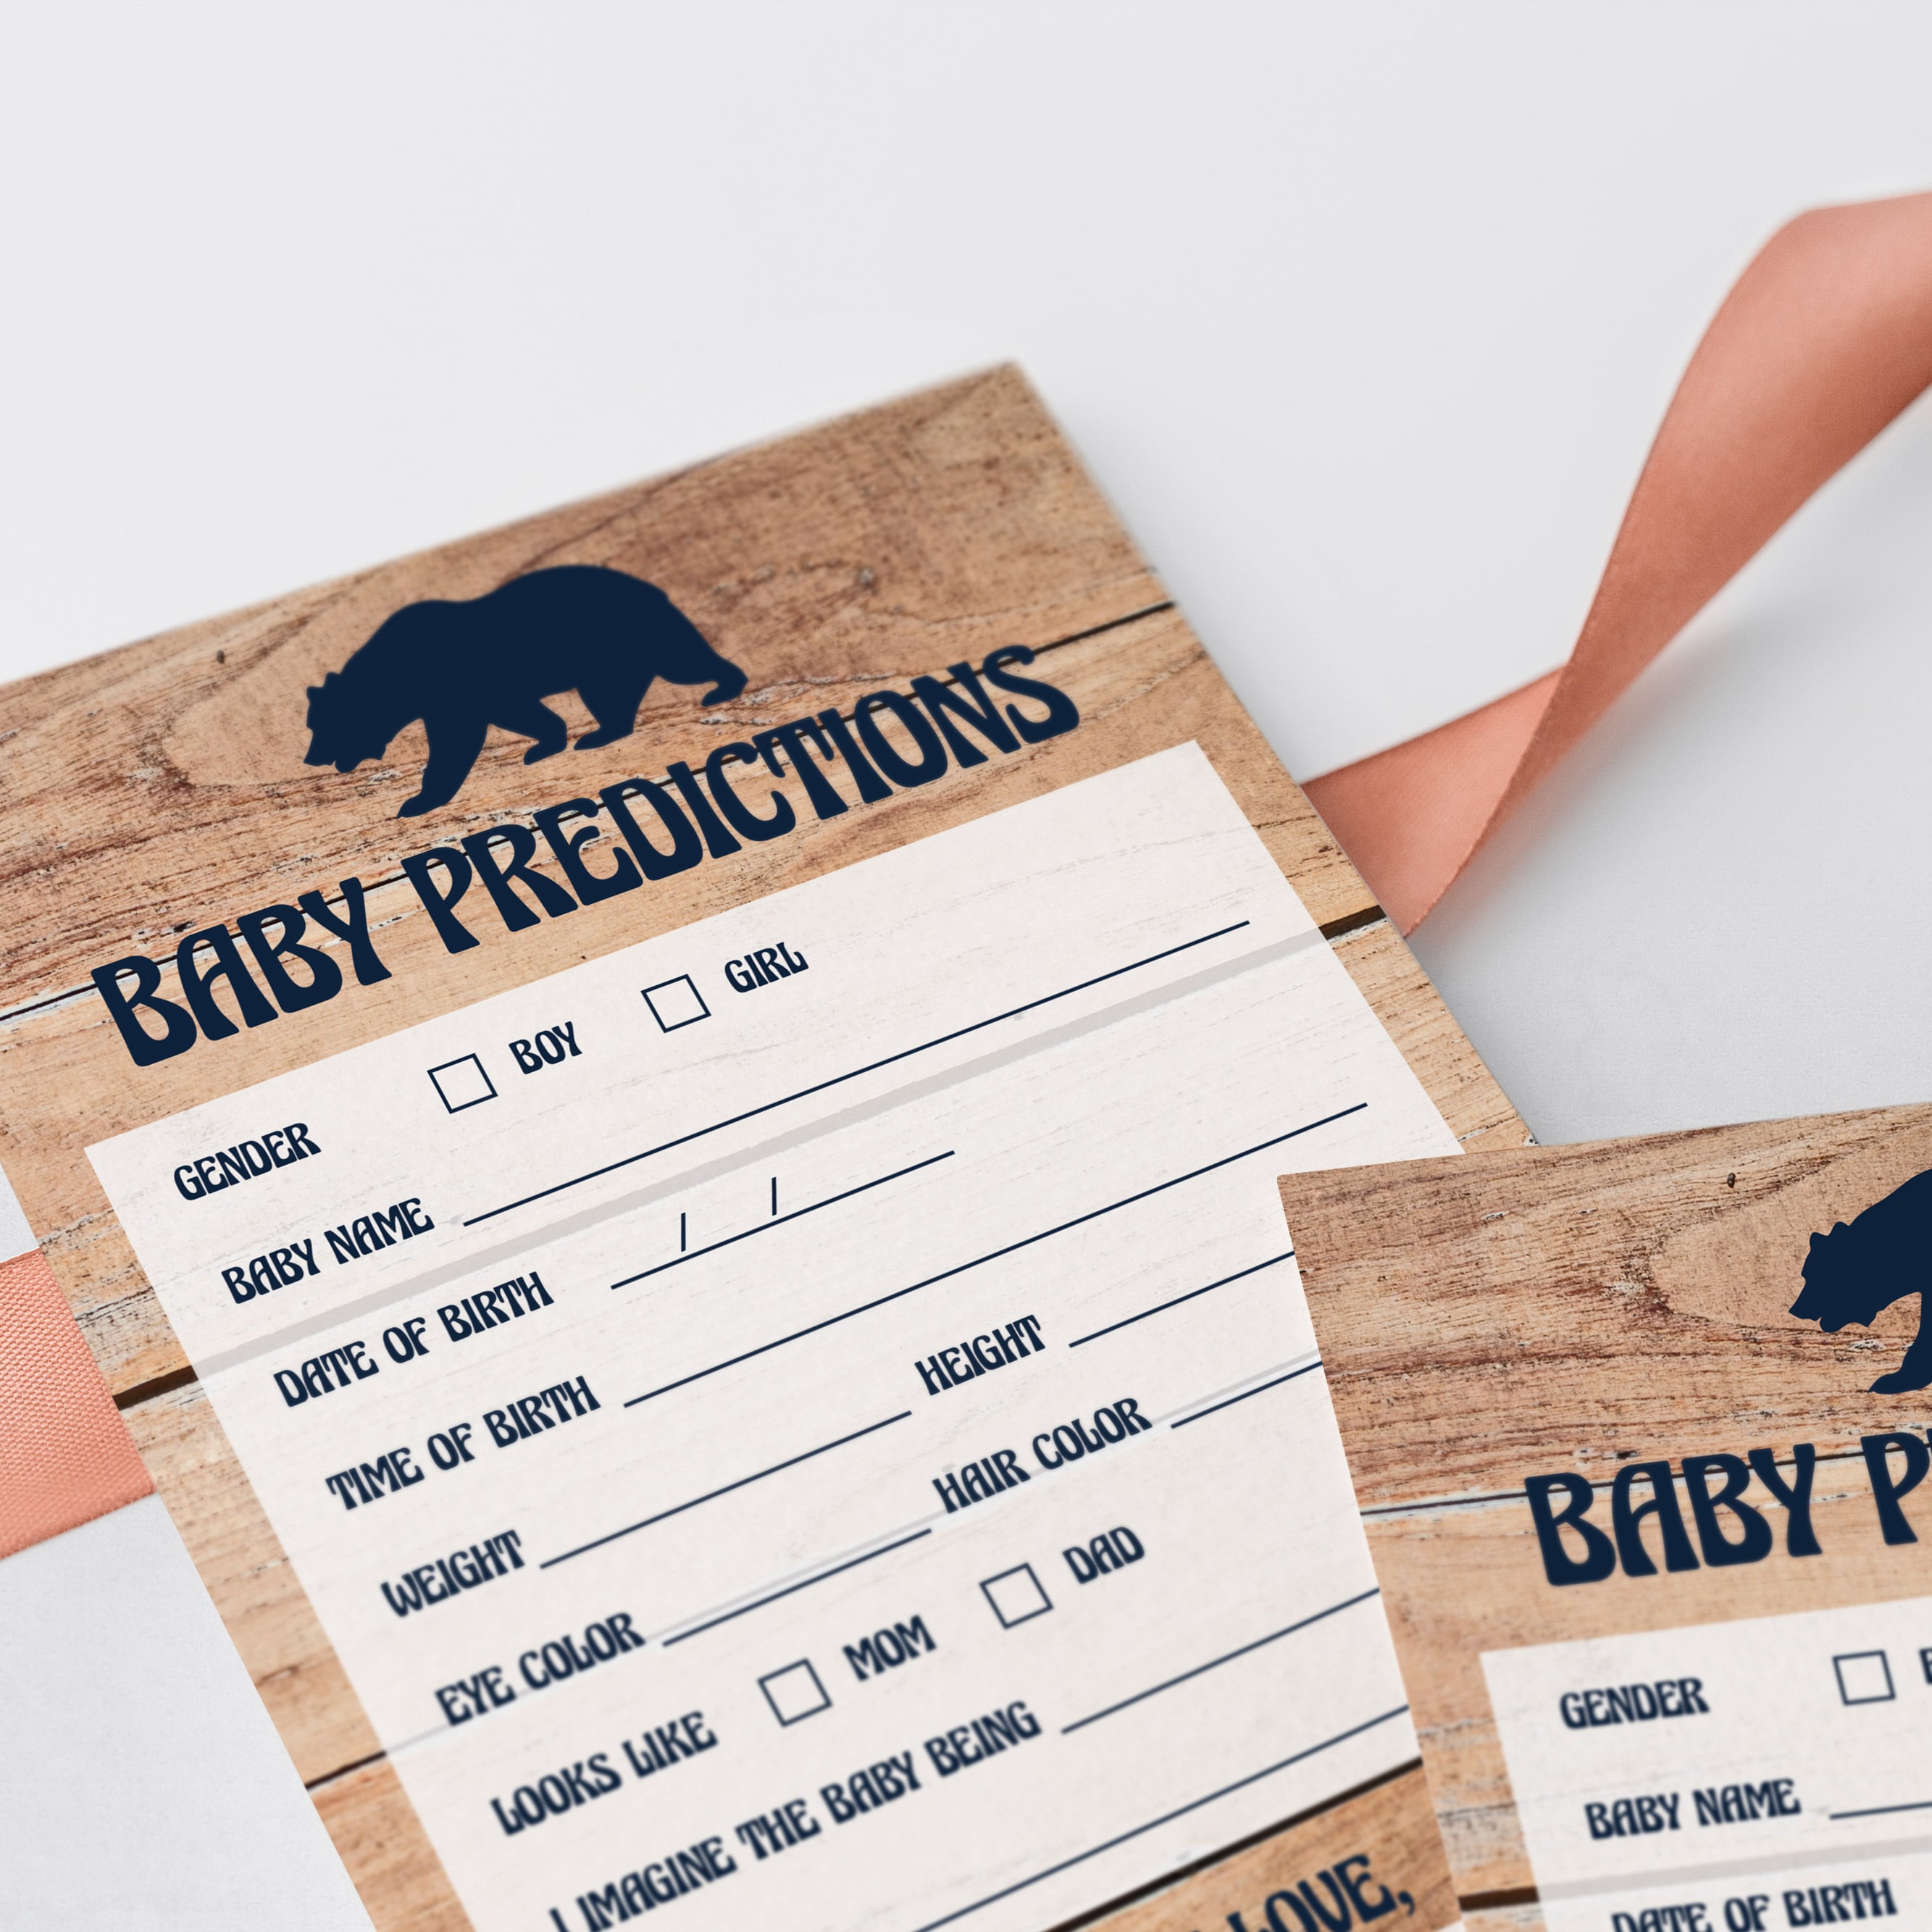 Baby predictions game for rustic themed baby shower by LittleSizzle